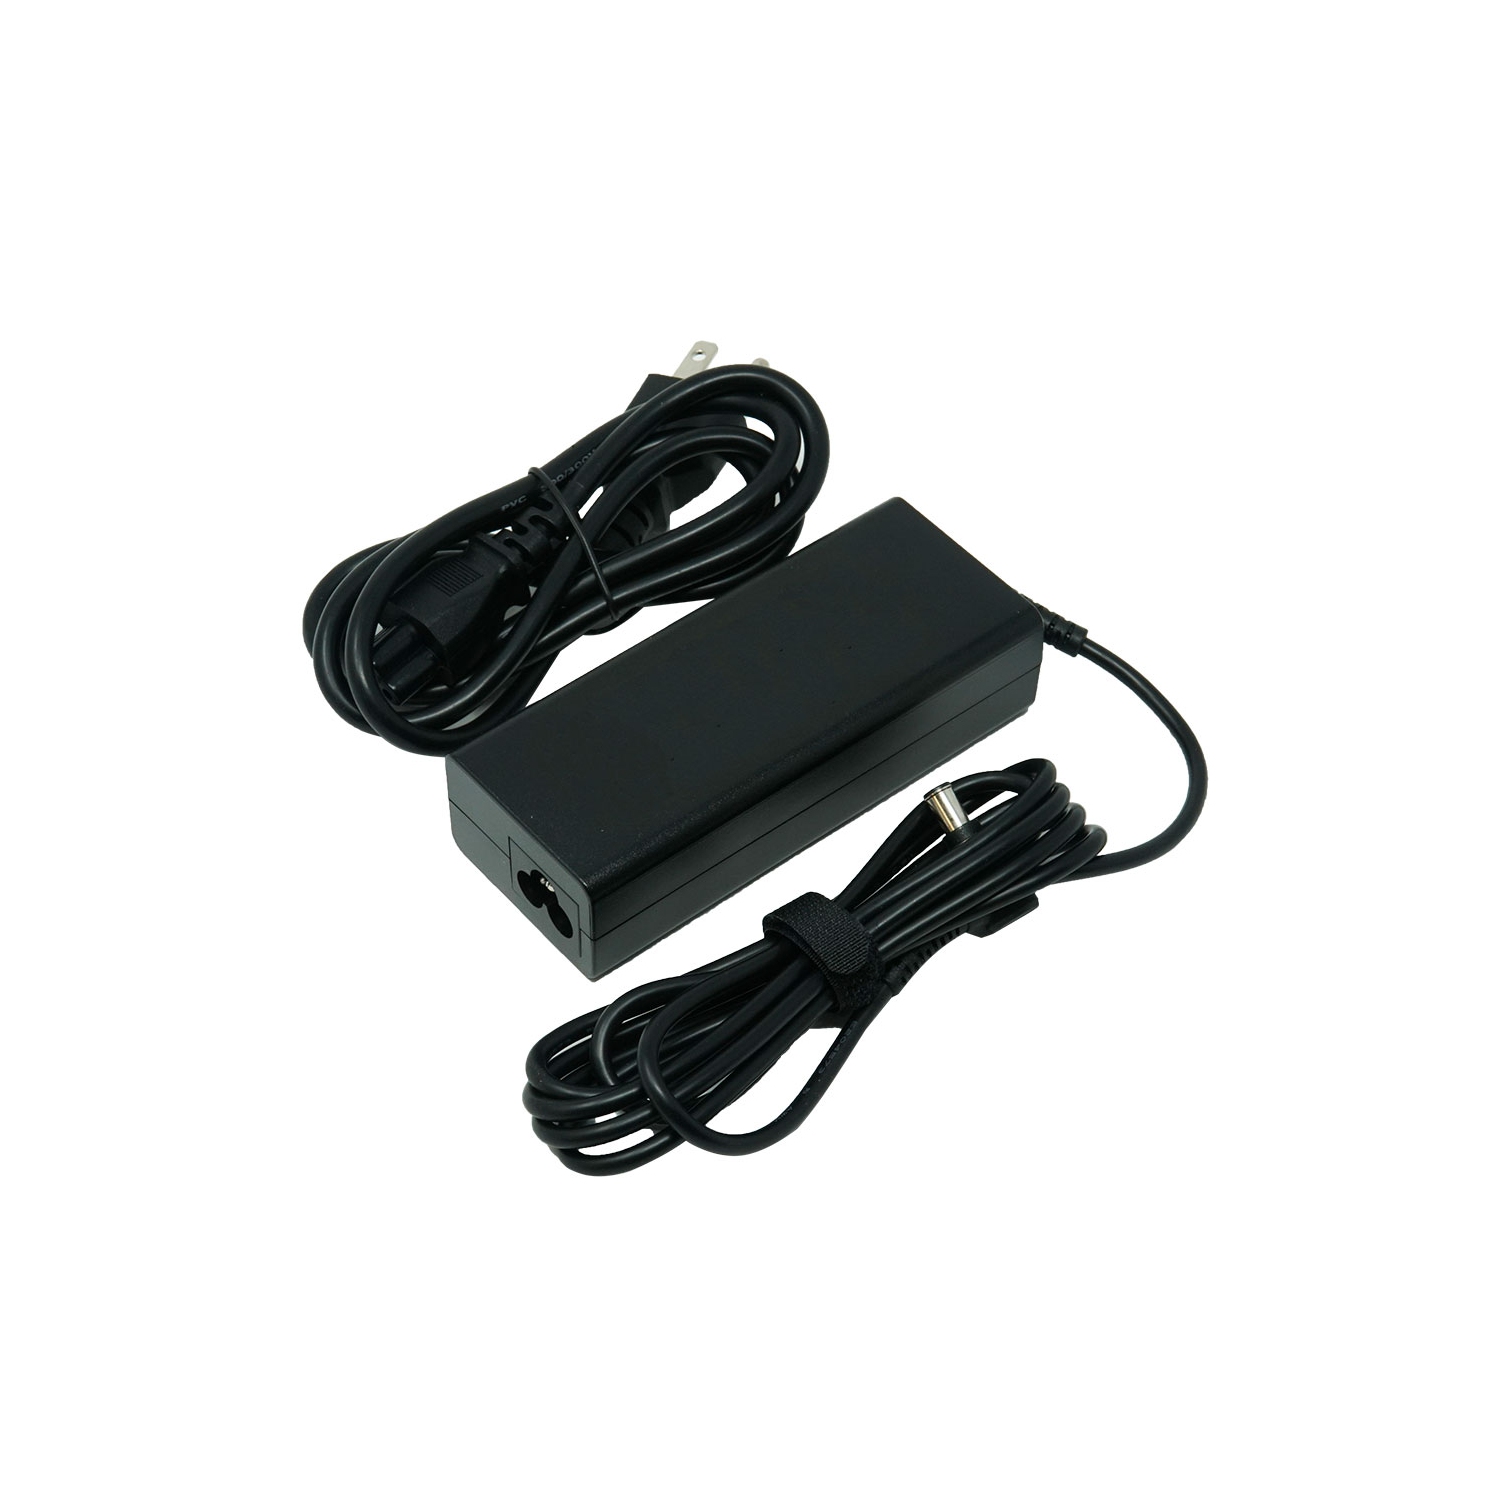 Dr. Battery - Notebook Adapter for LG Widebook R580 / R590 / P430-K / R480 / PCGA-AC19V14 / PCGA-AC19V19 - Free Shipping